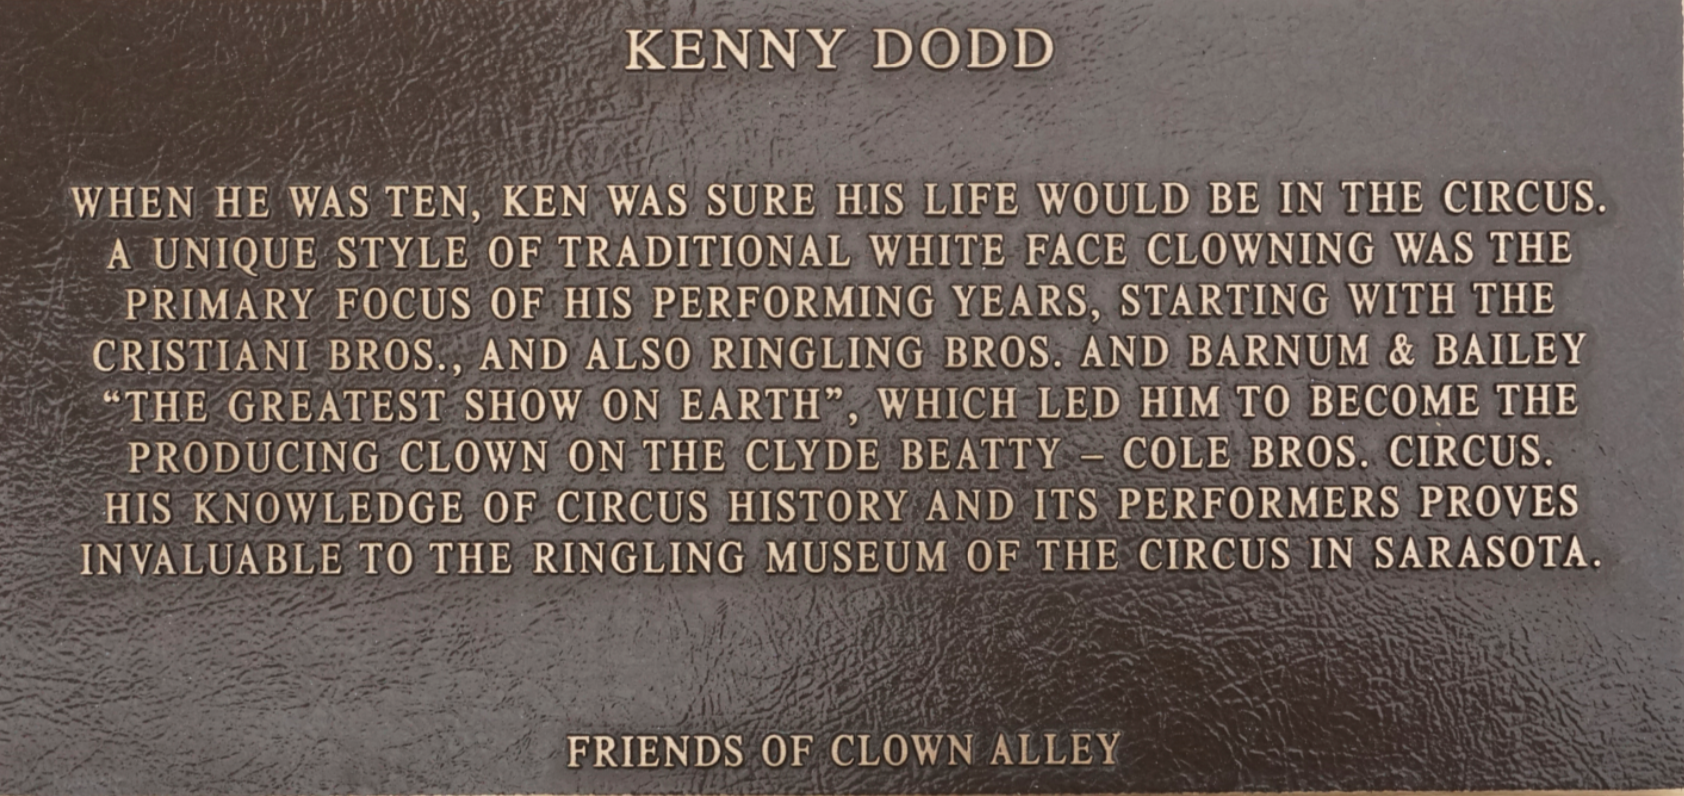 Kenny Dodd Circus Ring Of Fame Foundation inductee plaque